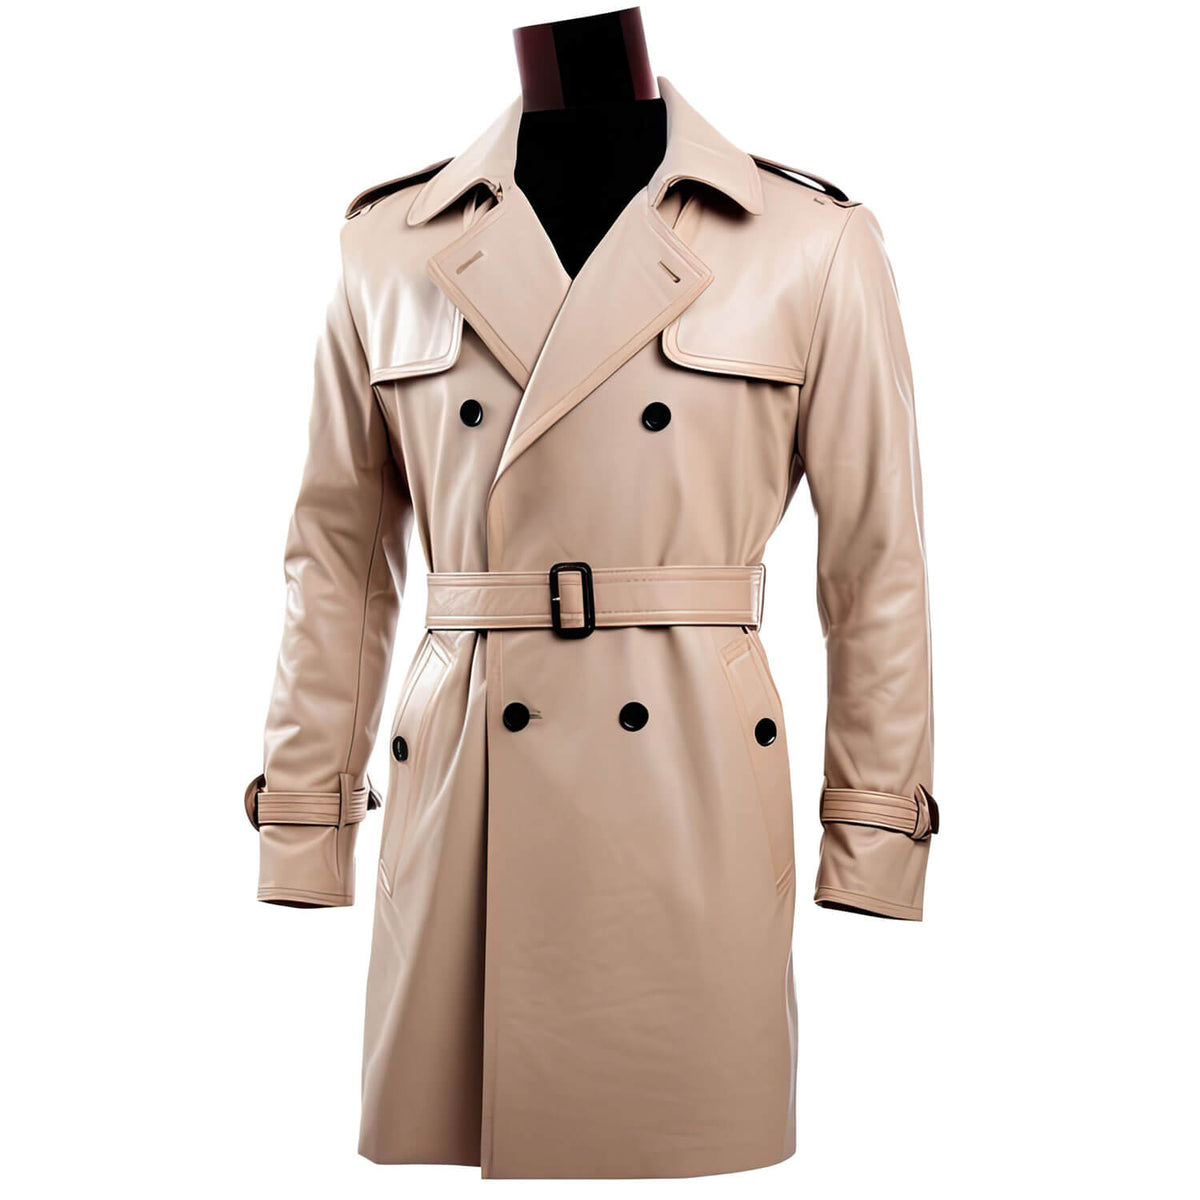 Men’s Beige Genuine Sheepskin Notch Lapel Collar Casual Classy Office Outerwear Double Breasted Fashionable Leather Trench Coat - Front View - AceCart